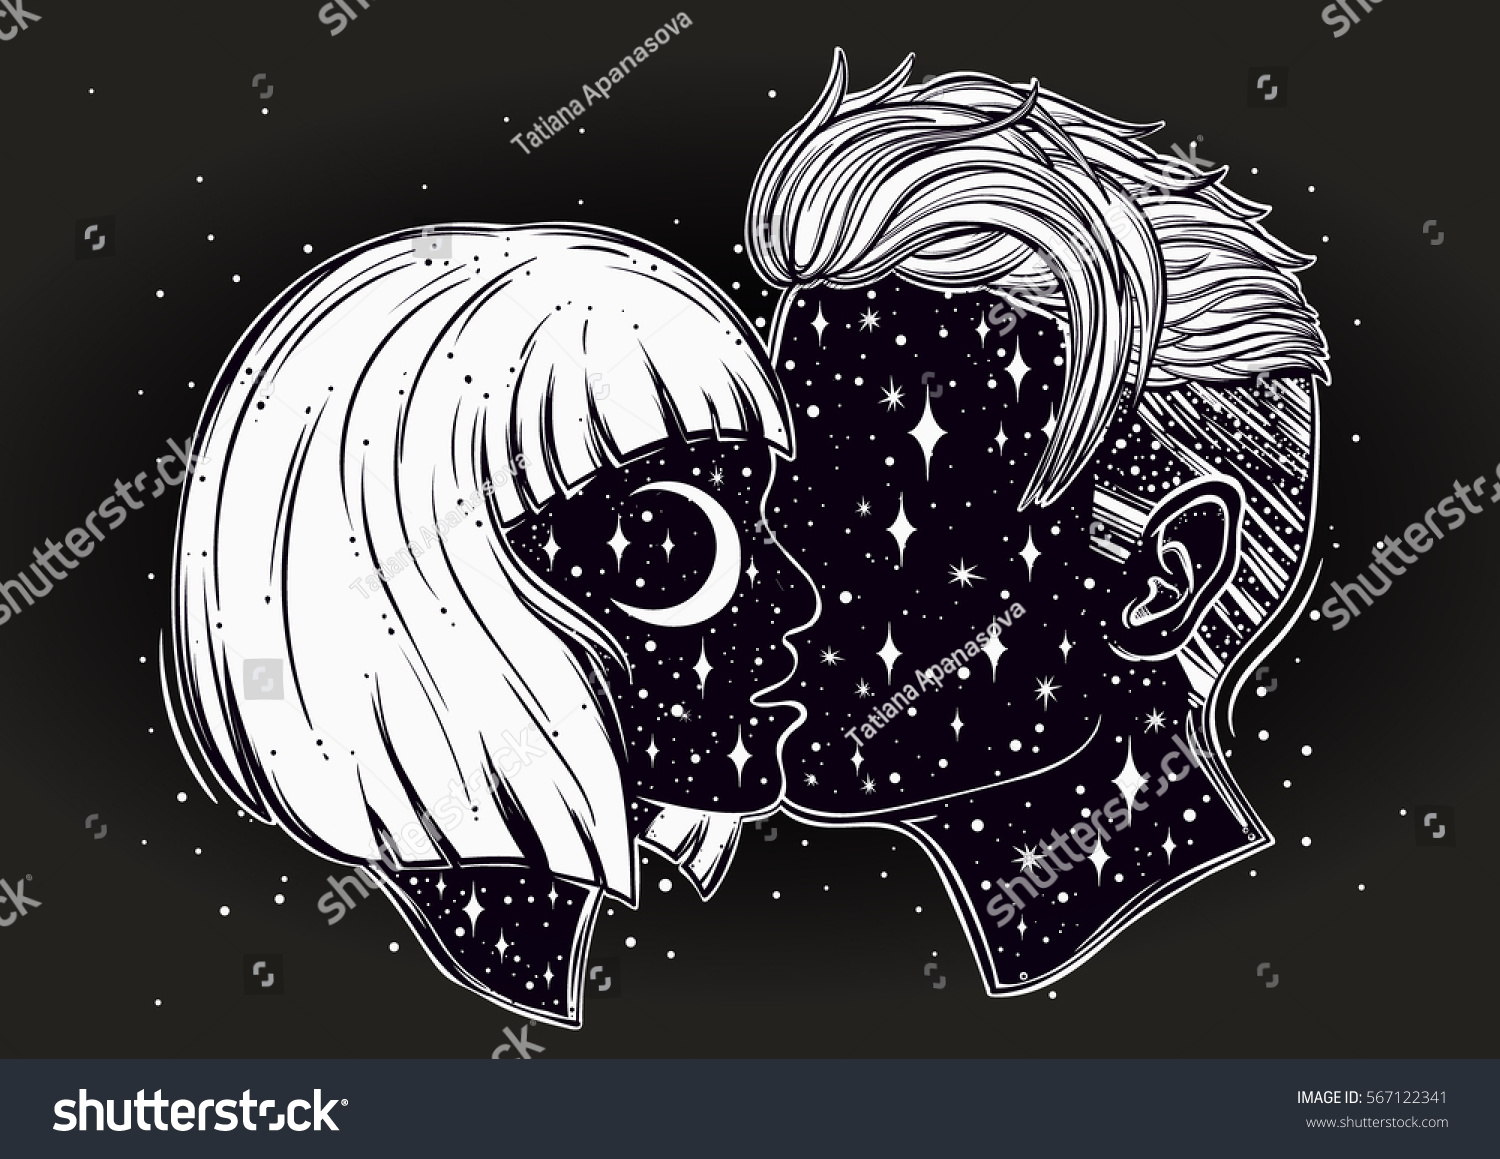 Space Couple